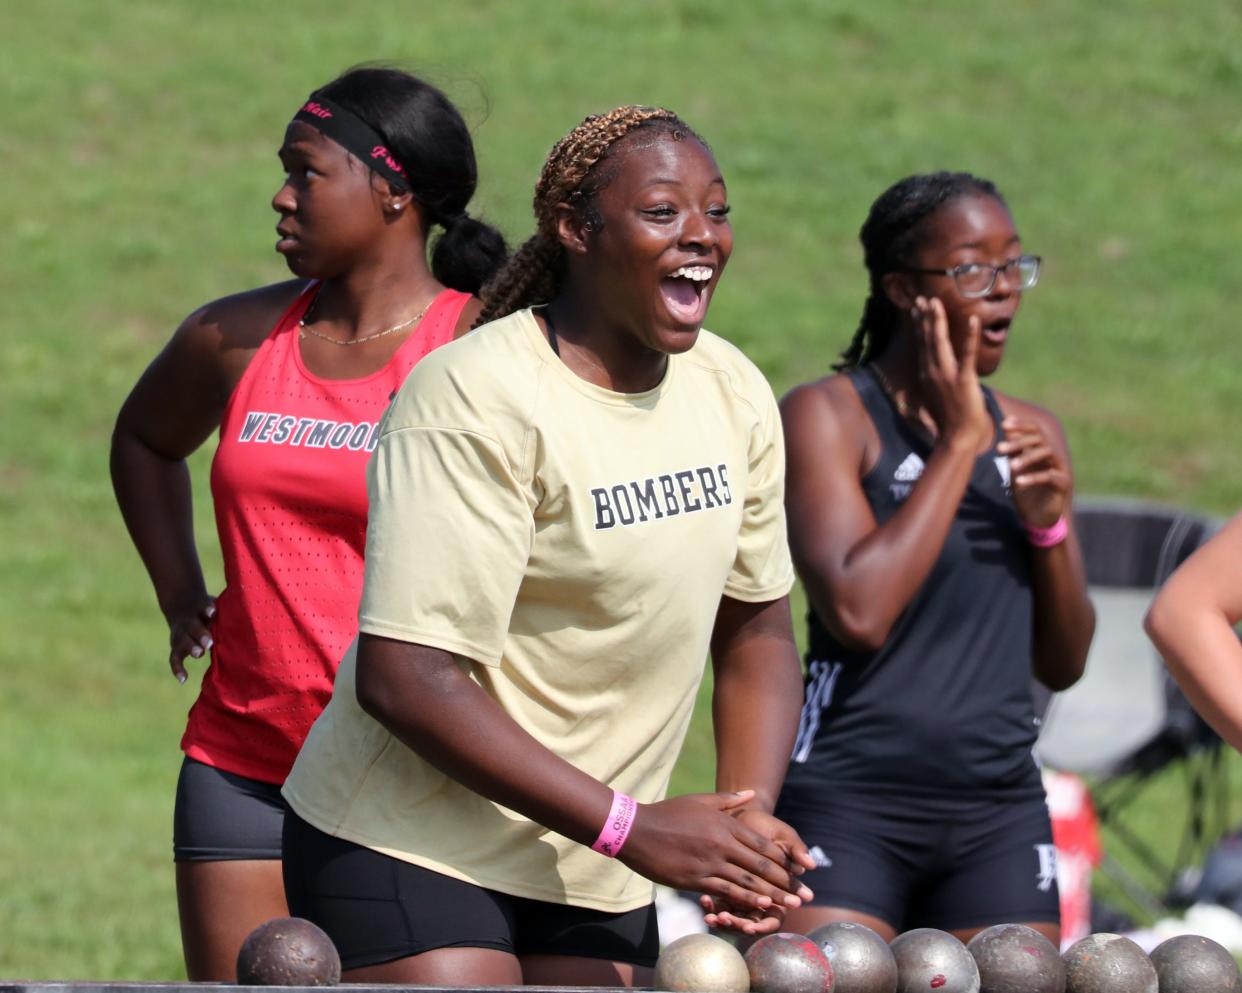 Midwest City's De'Yanna Douglas reacts after  the announcement of her state record shot put of 46' 9" during the State 5A, 6A Track Meet at Yukon High School on May 12, 2023 in Yukon, Okla.  [Steve Sisney/For The Oklahoman]